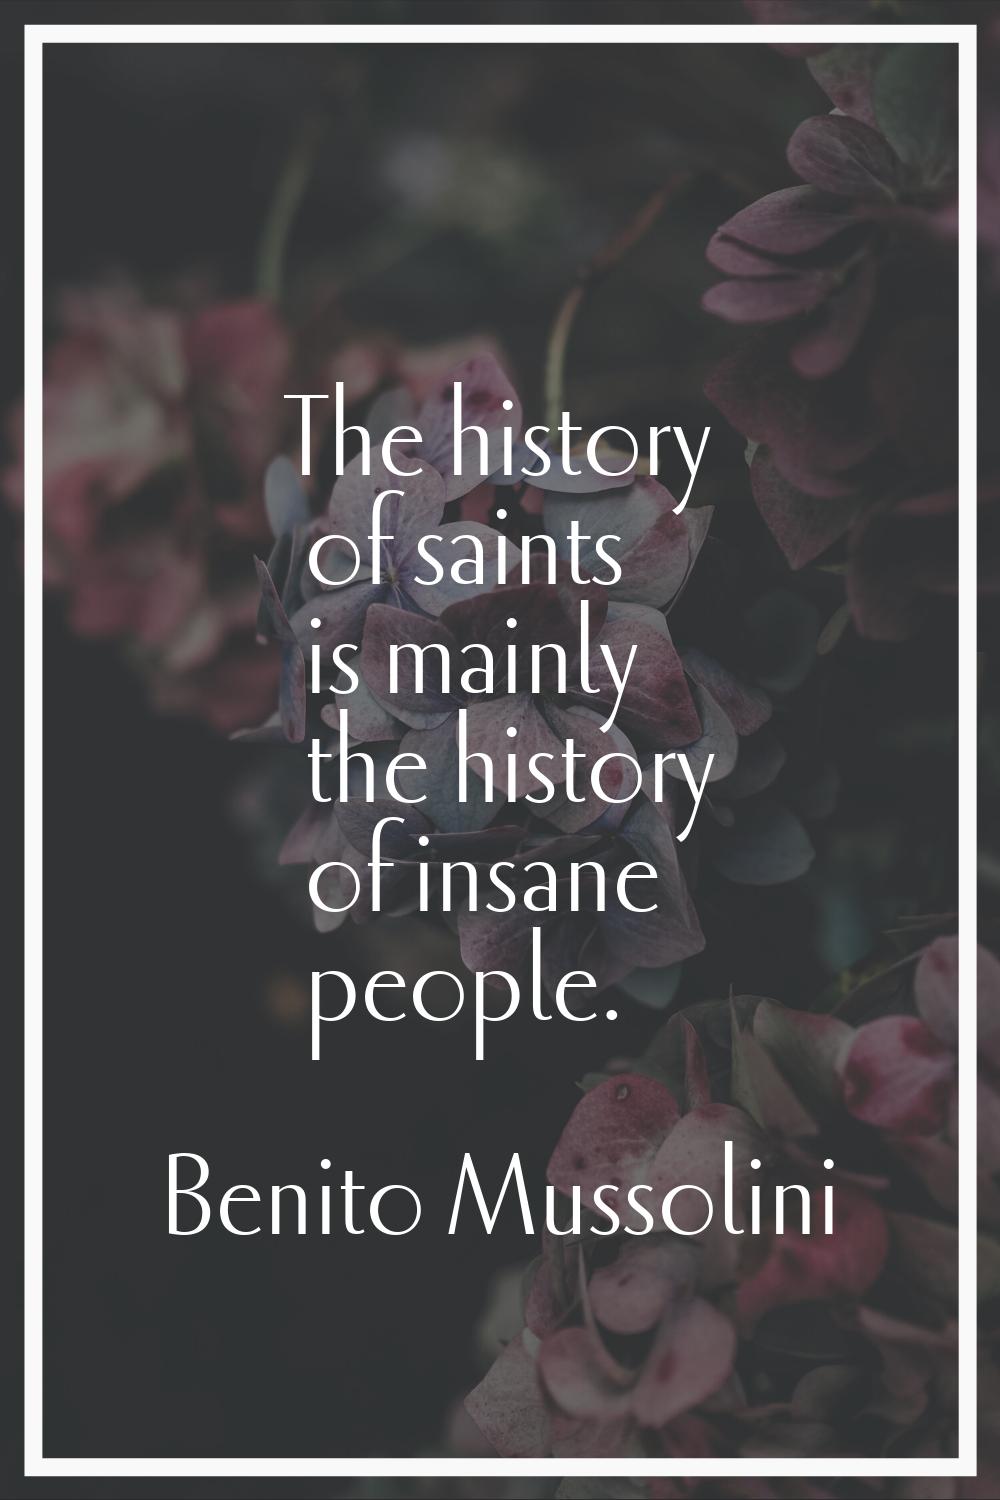 The history of saints is mainly the history of insane people.